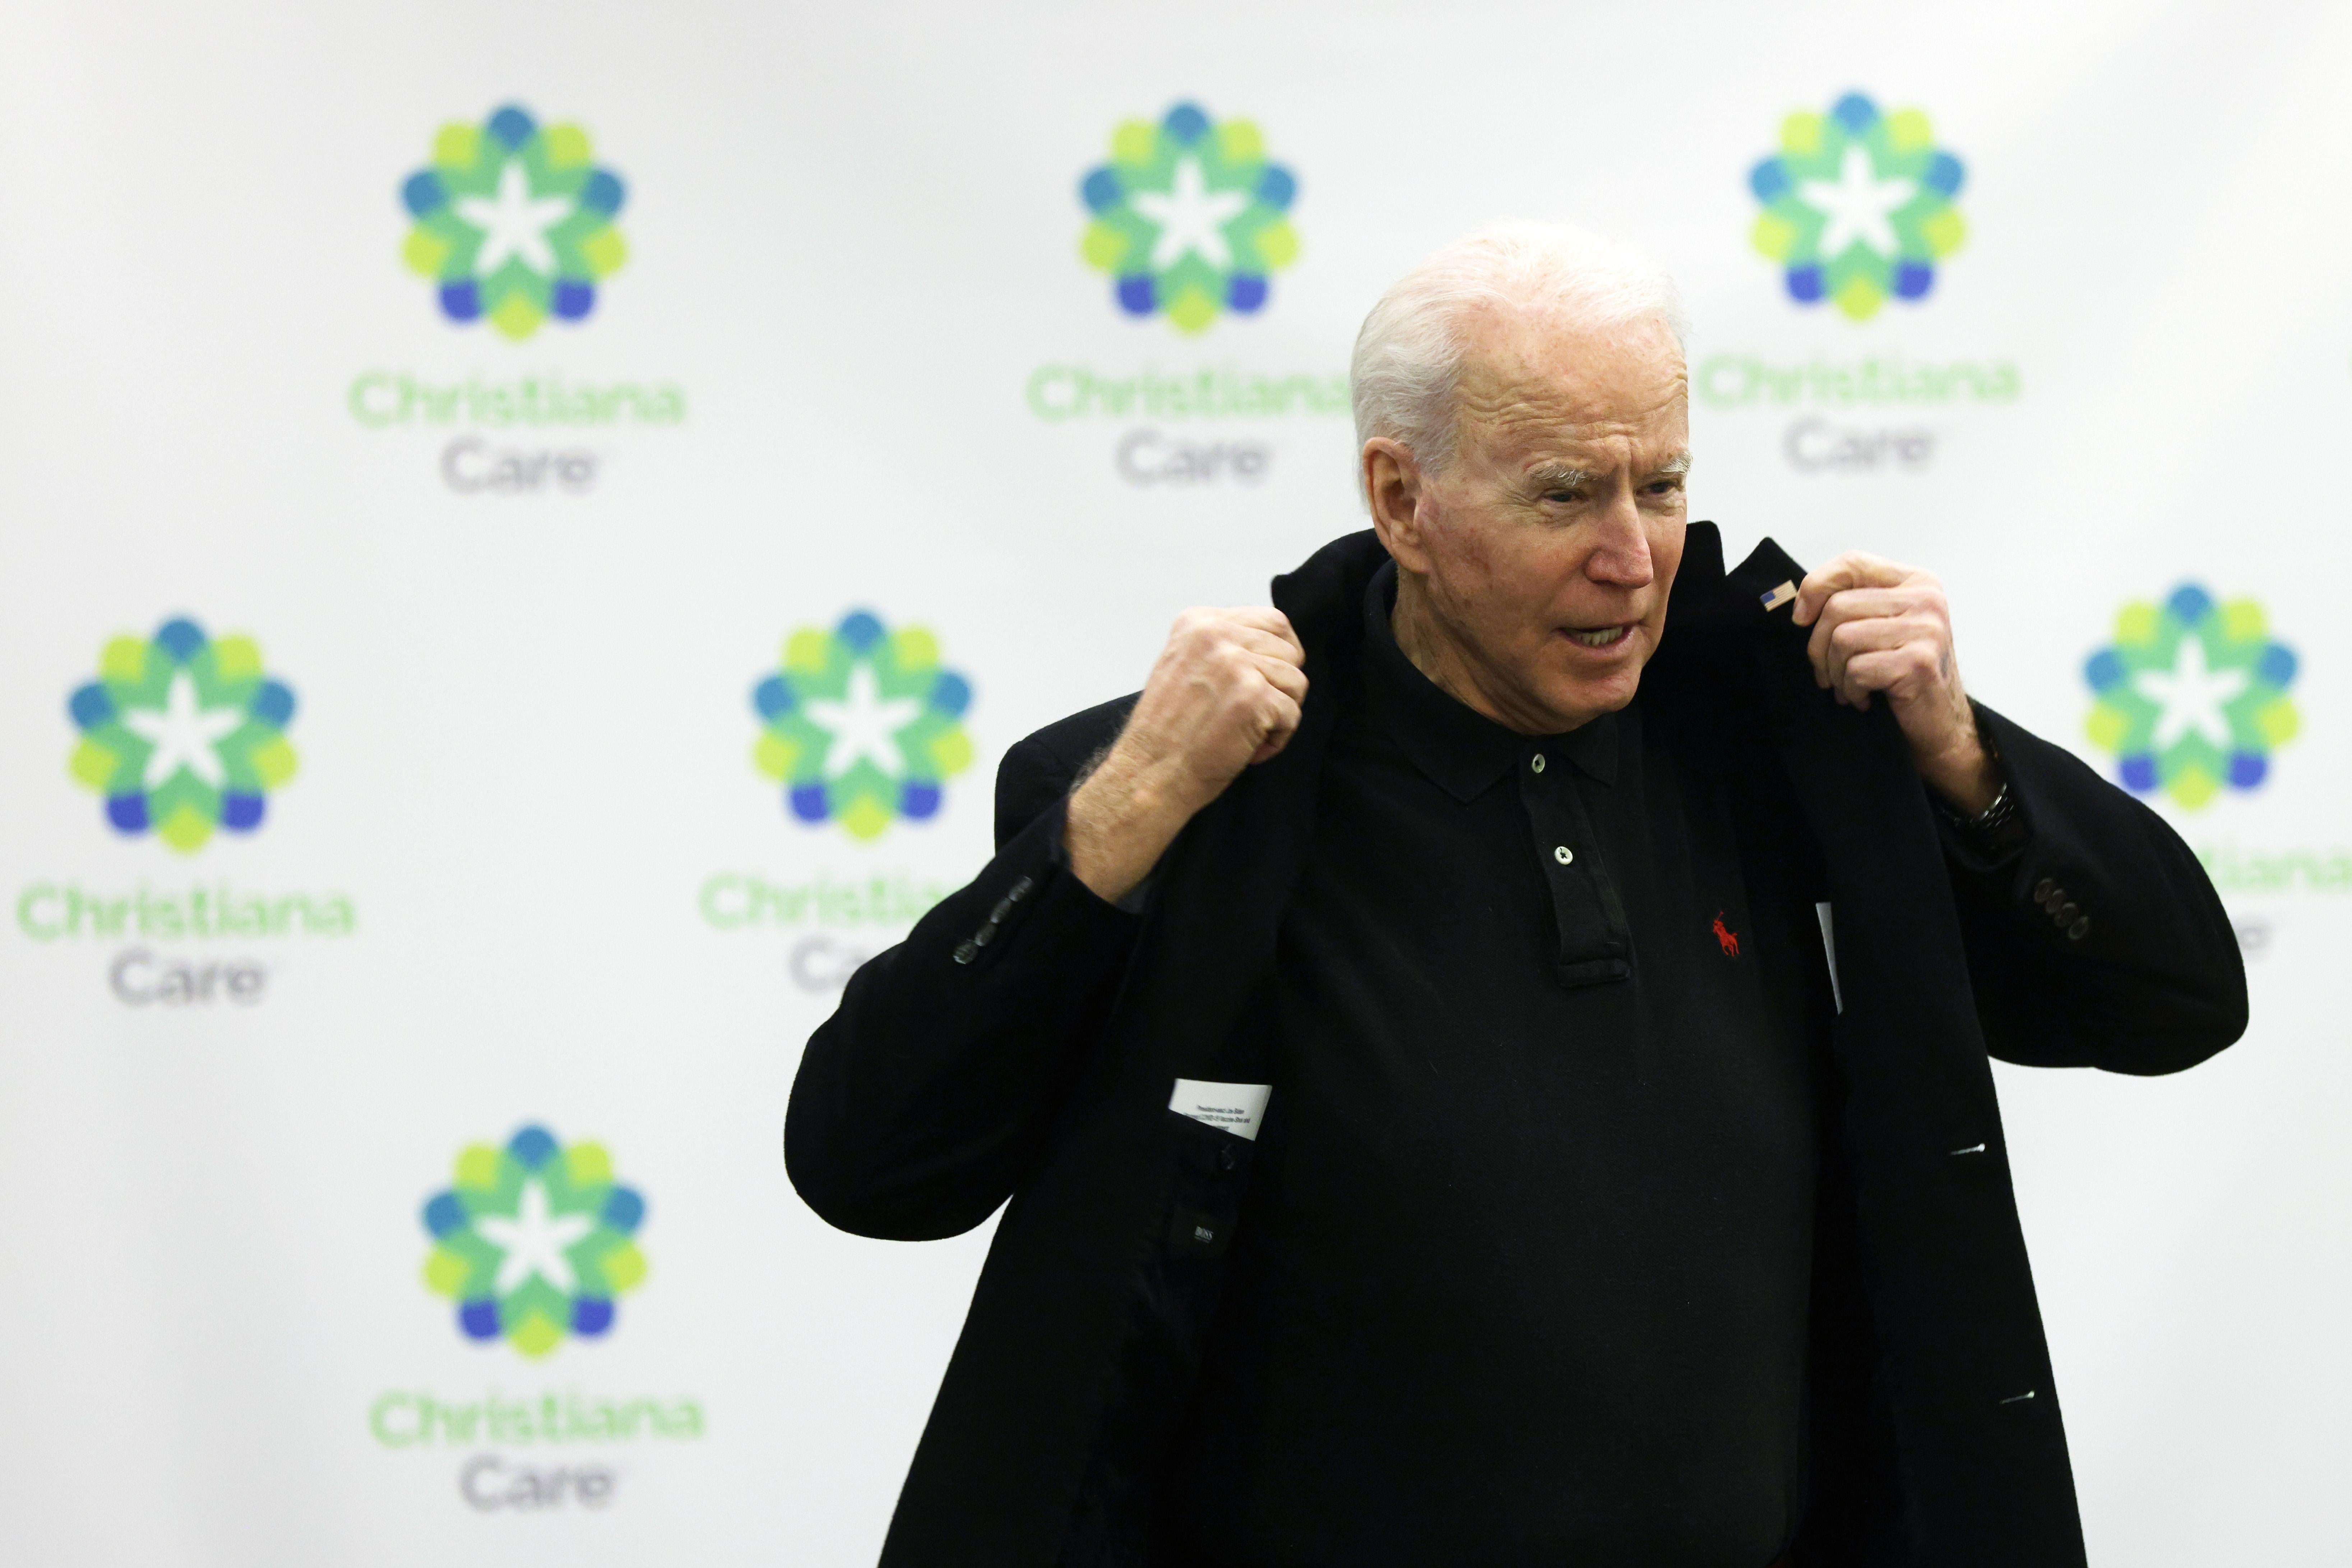 WILMINGTON, DELAWARE - JANUARY 11: President-elect Joe Biden prepares to leave after receiving his second dose of the Pfizer/BioNTech COVID-19 vaccination at ChristianaCare Christiana Hospital on January 11, 2021 in Newark, Delaware. Biden received the second dose of the coronavirus vaccine three weeks after his first dose, received a few days before Christmas. (Photo by Alex Wong/Getty Images)